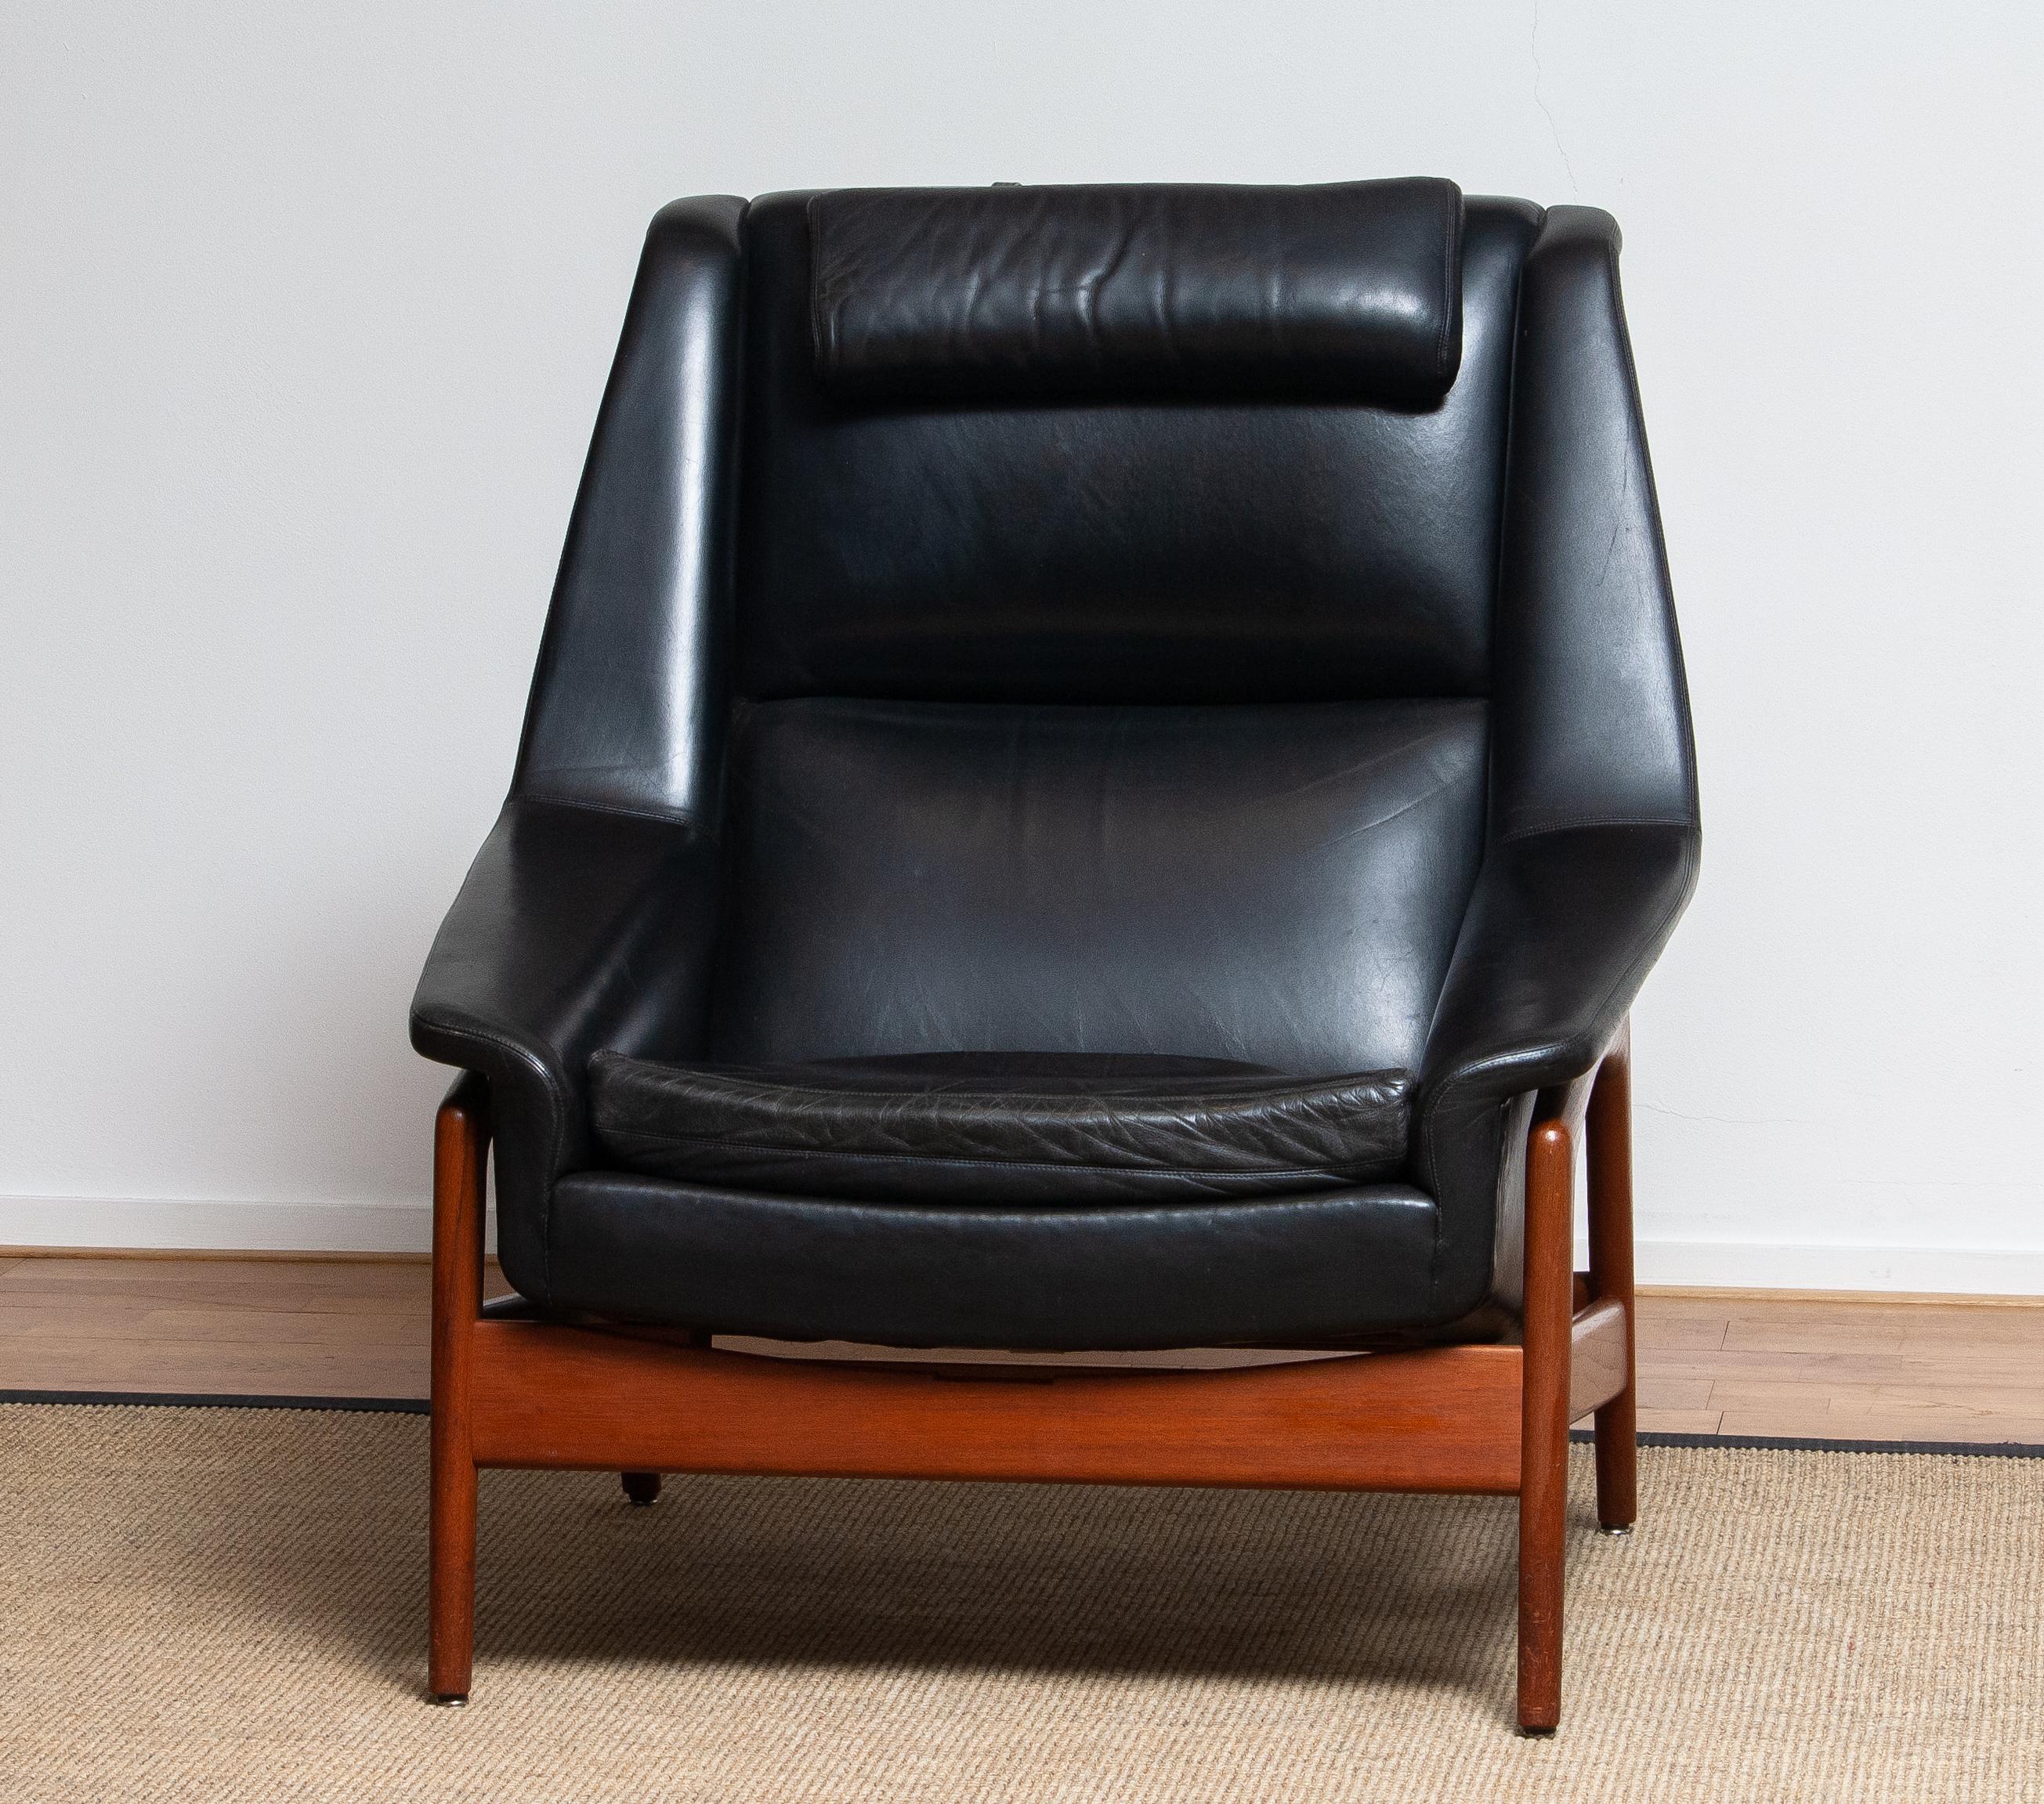 1960s, Lounge Chair Profil by Folke Ohlsson for DUX in Black Leather and Teak 1 6